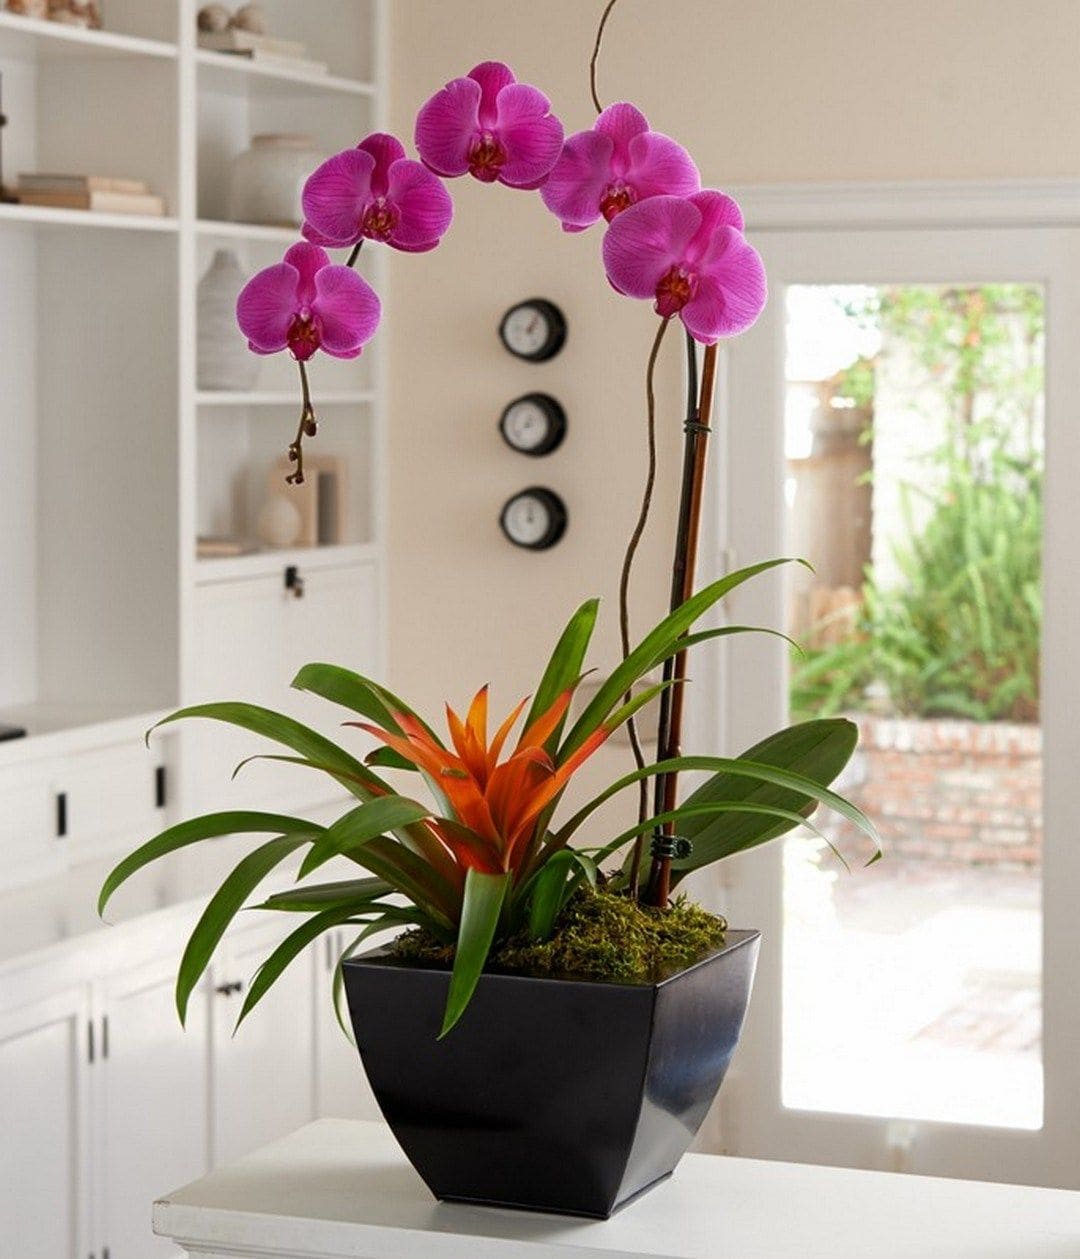 9 colors of indoor plants that can warm your home in winter - 75